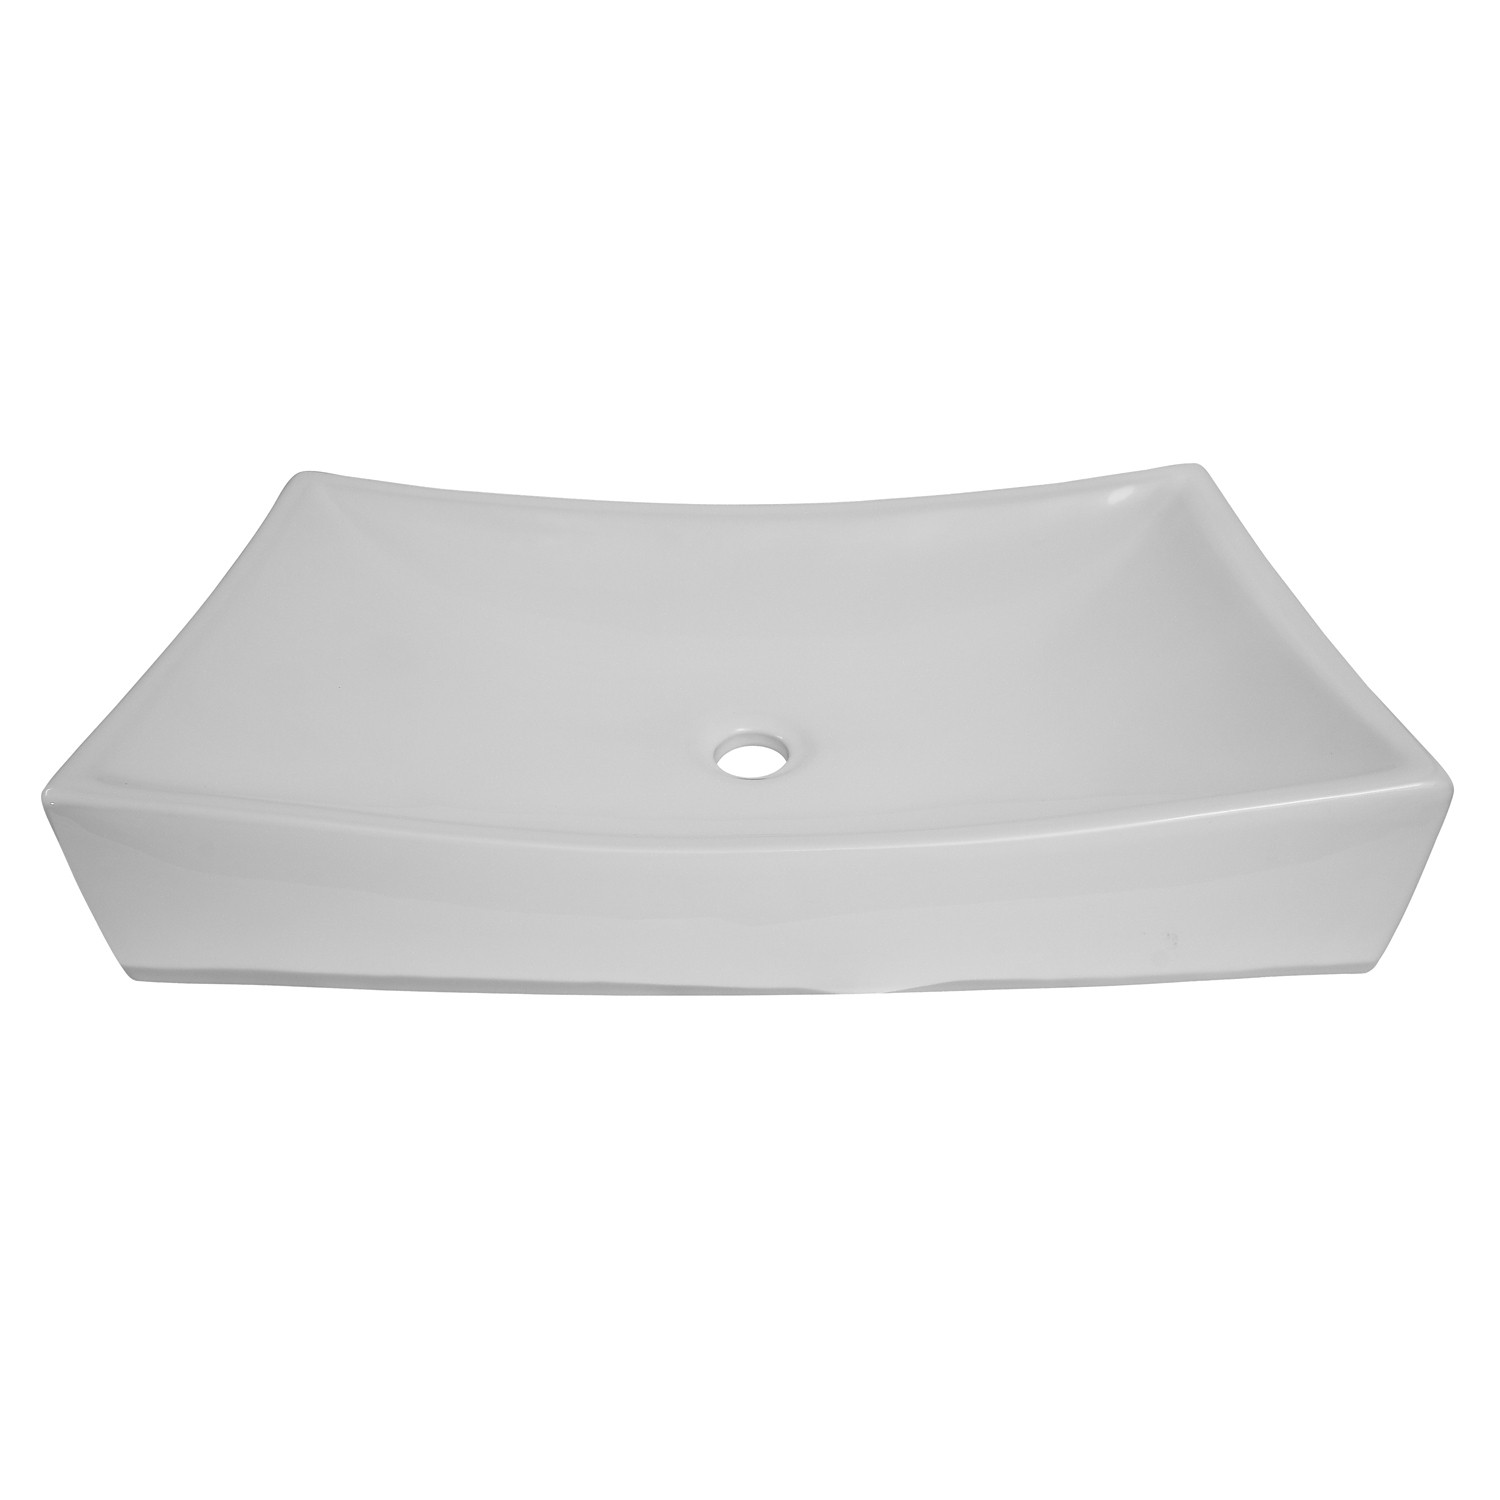 BARCLAY 4-491WH STYX 25 3/4 INCH SINGLE BASIN ABOVE COUNTER BATHROOM SINK - WHITE